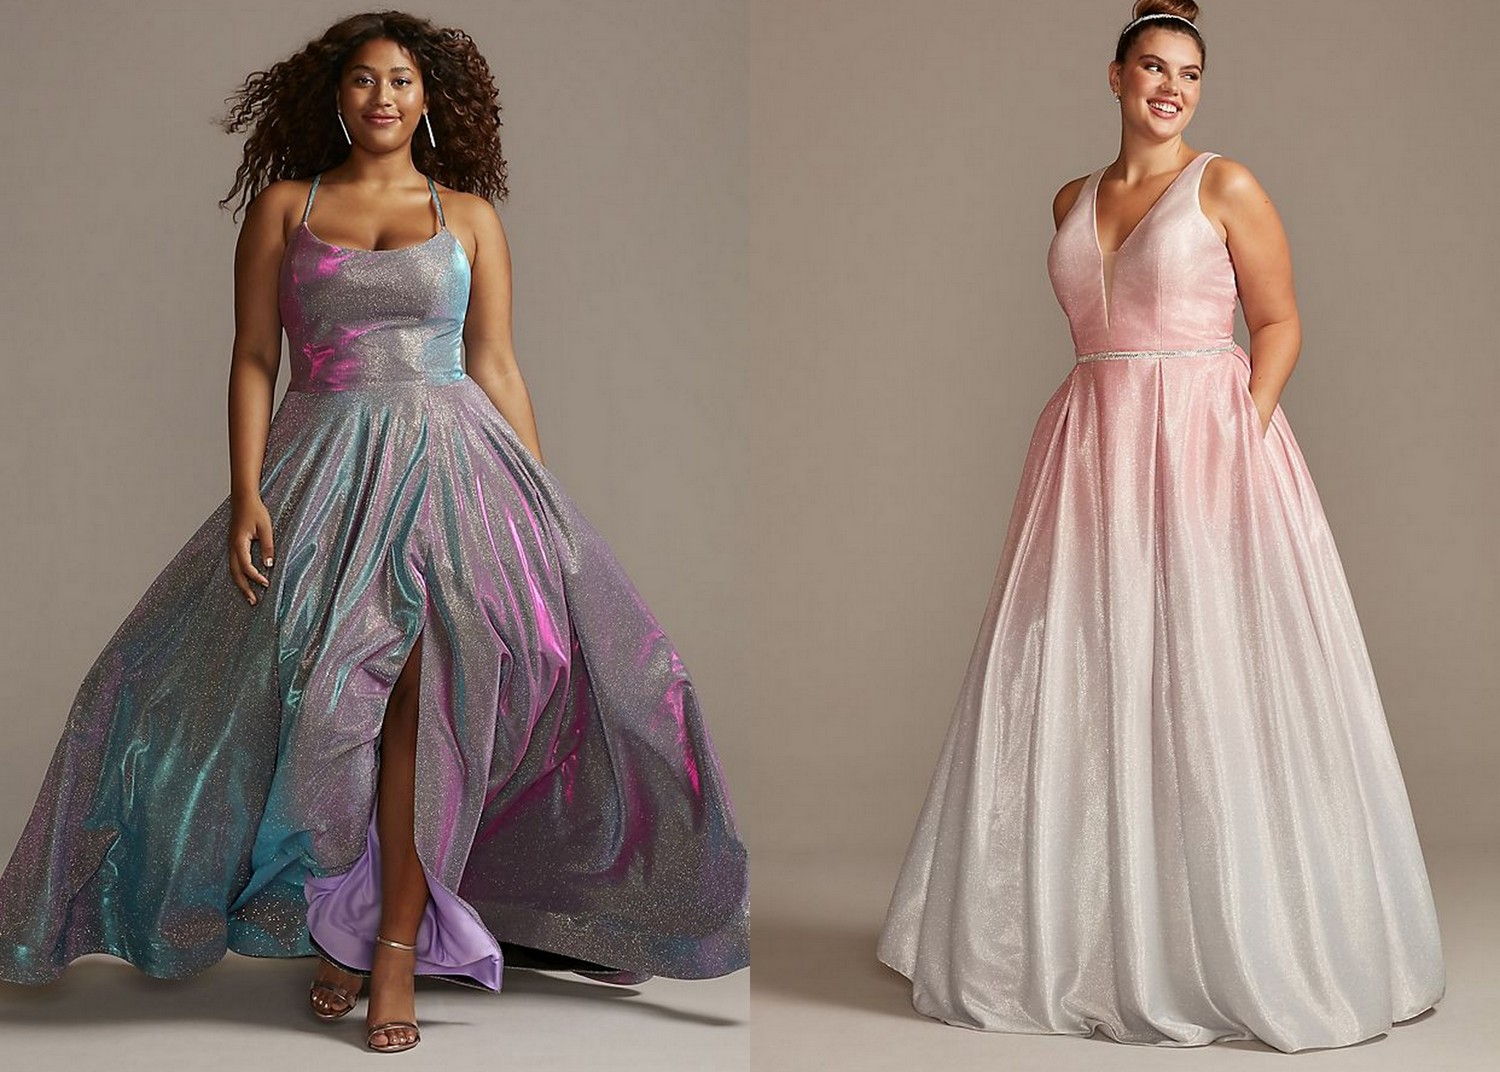 Here are 40 Perfectly Pretty Plus Size Prom Dresses!